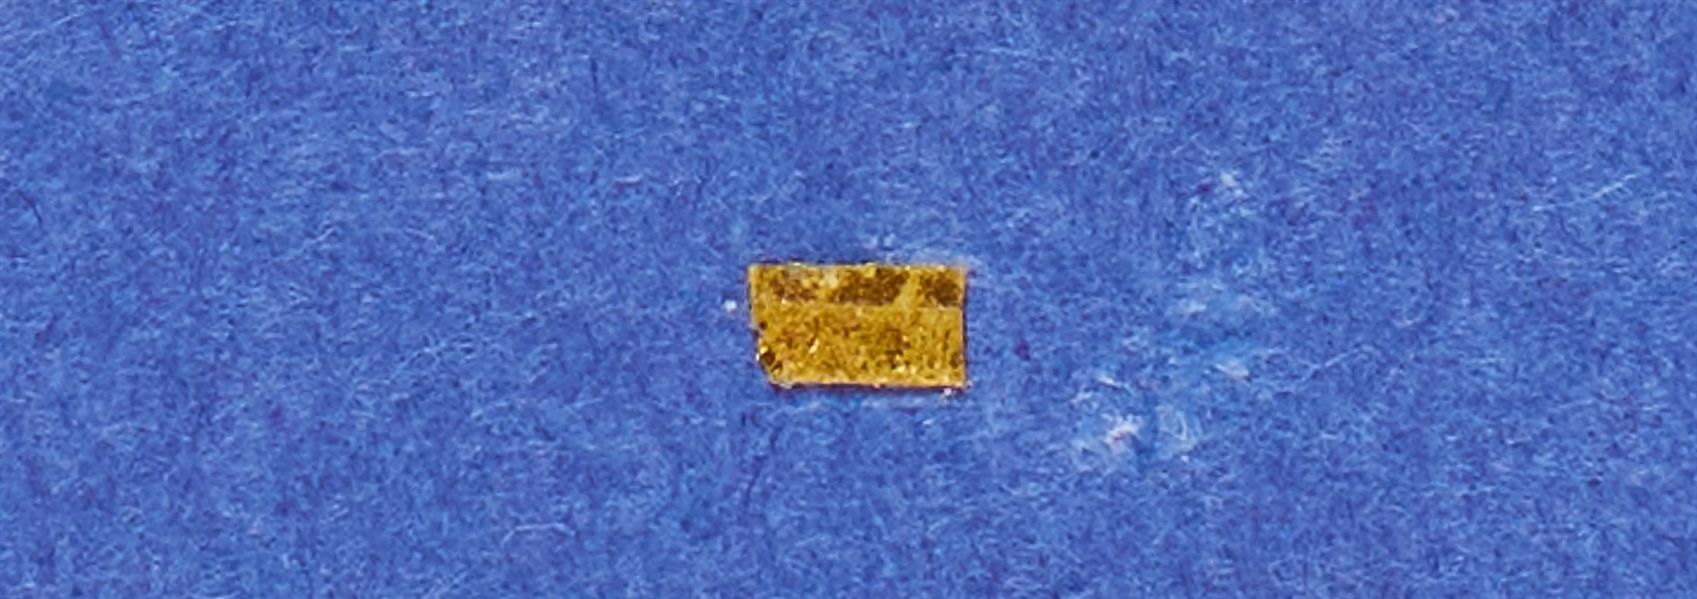 Space-Flown Piece of Kapton Foil Coating From The Apollo 11 Command Module, Columbia -- With LOA Signed by Buzz Aldrin